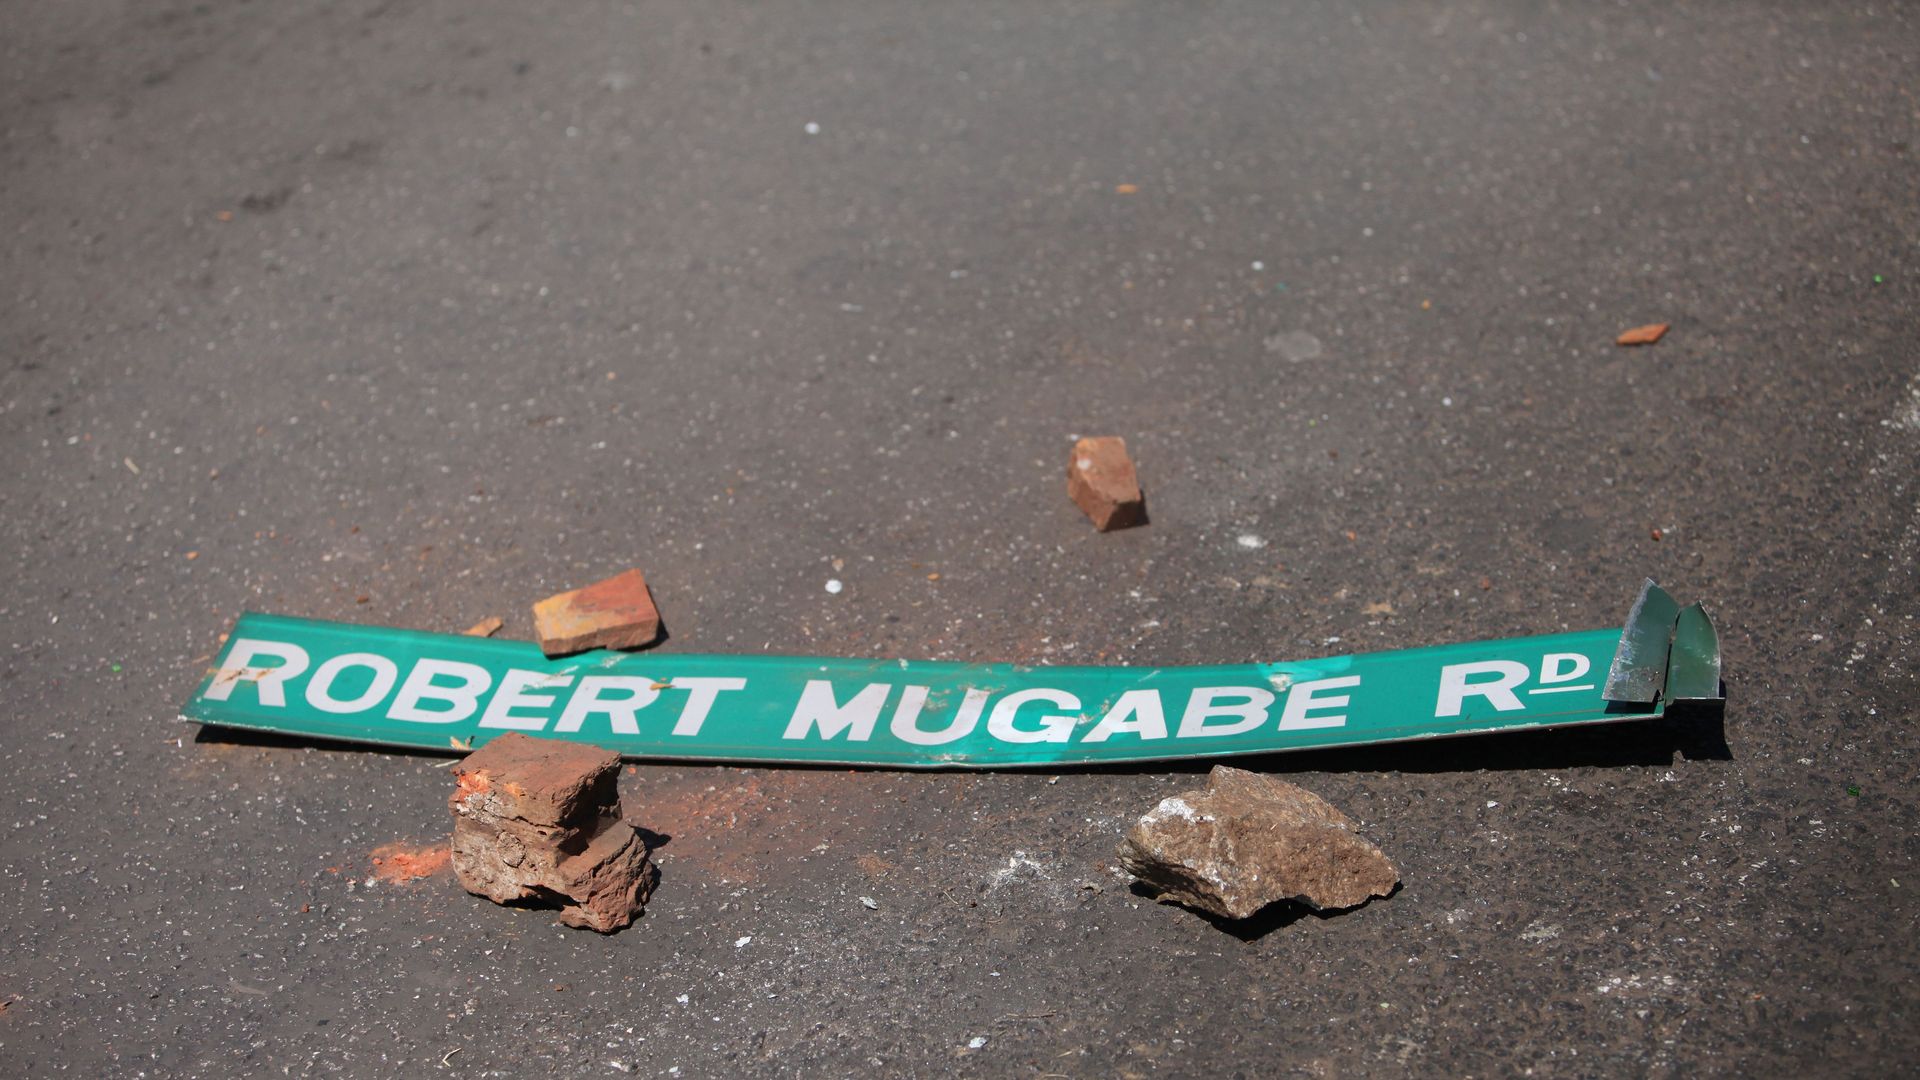 A street sign with Robert Mugabe's name on it